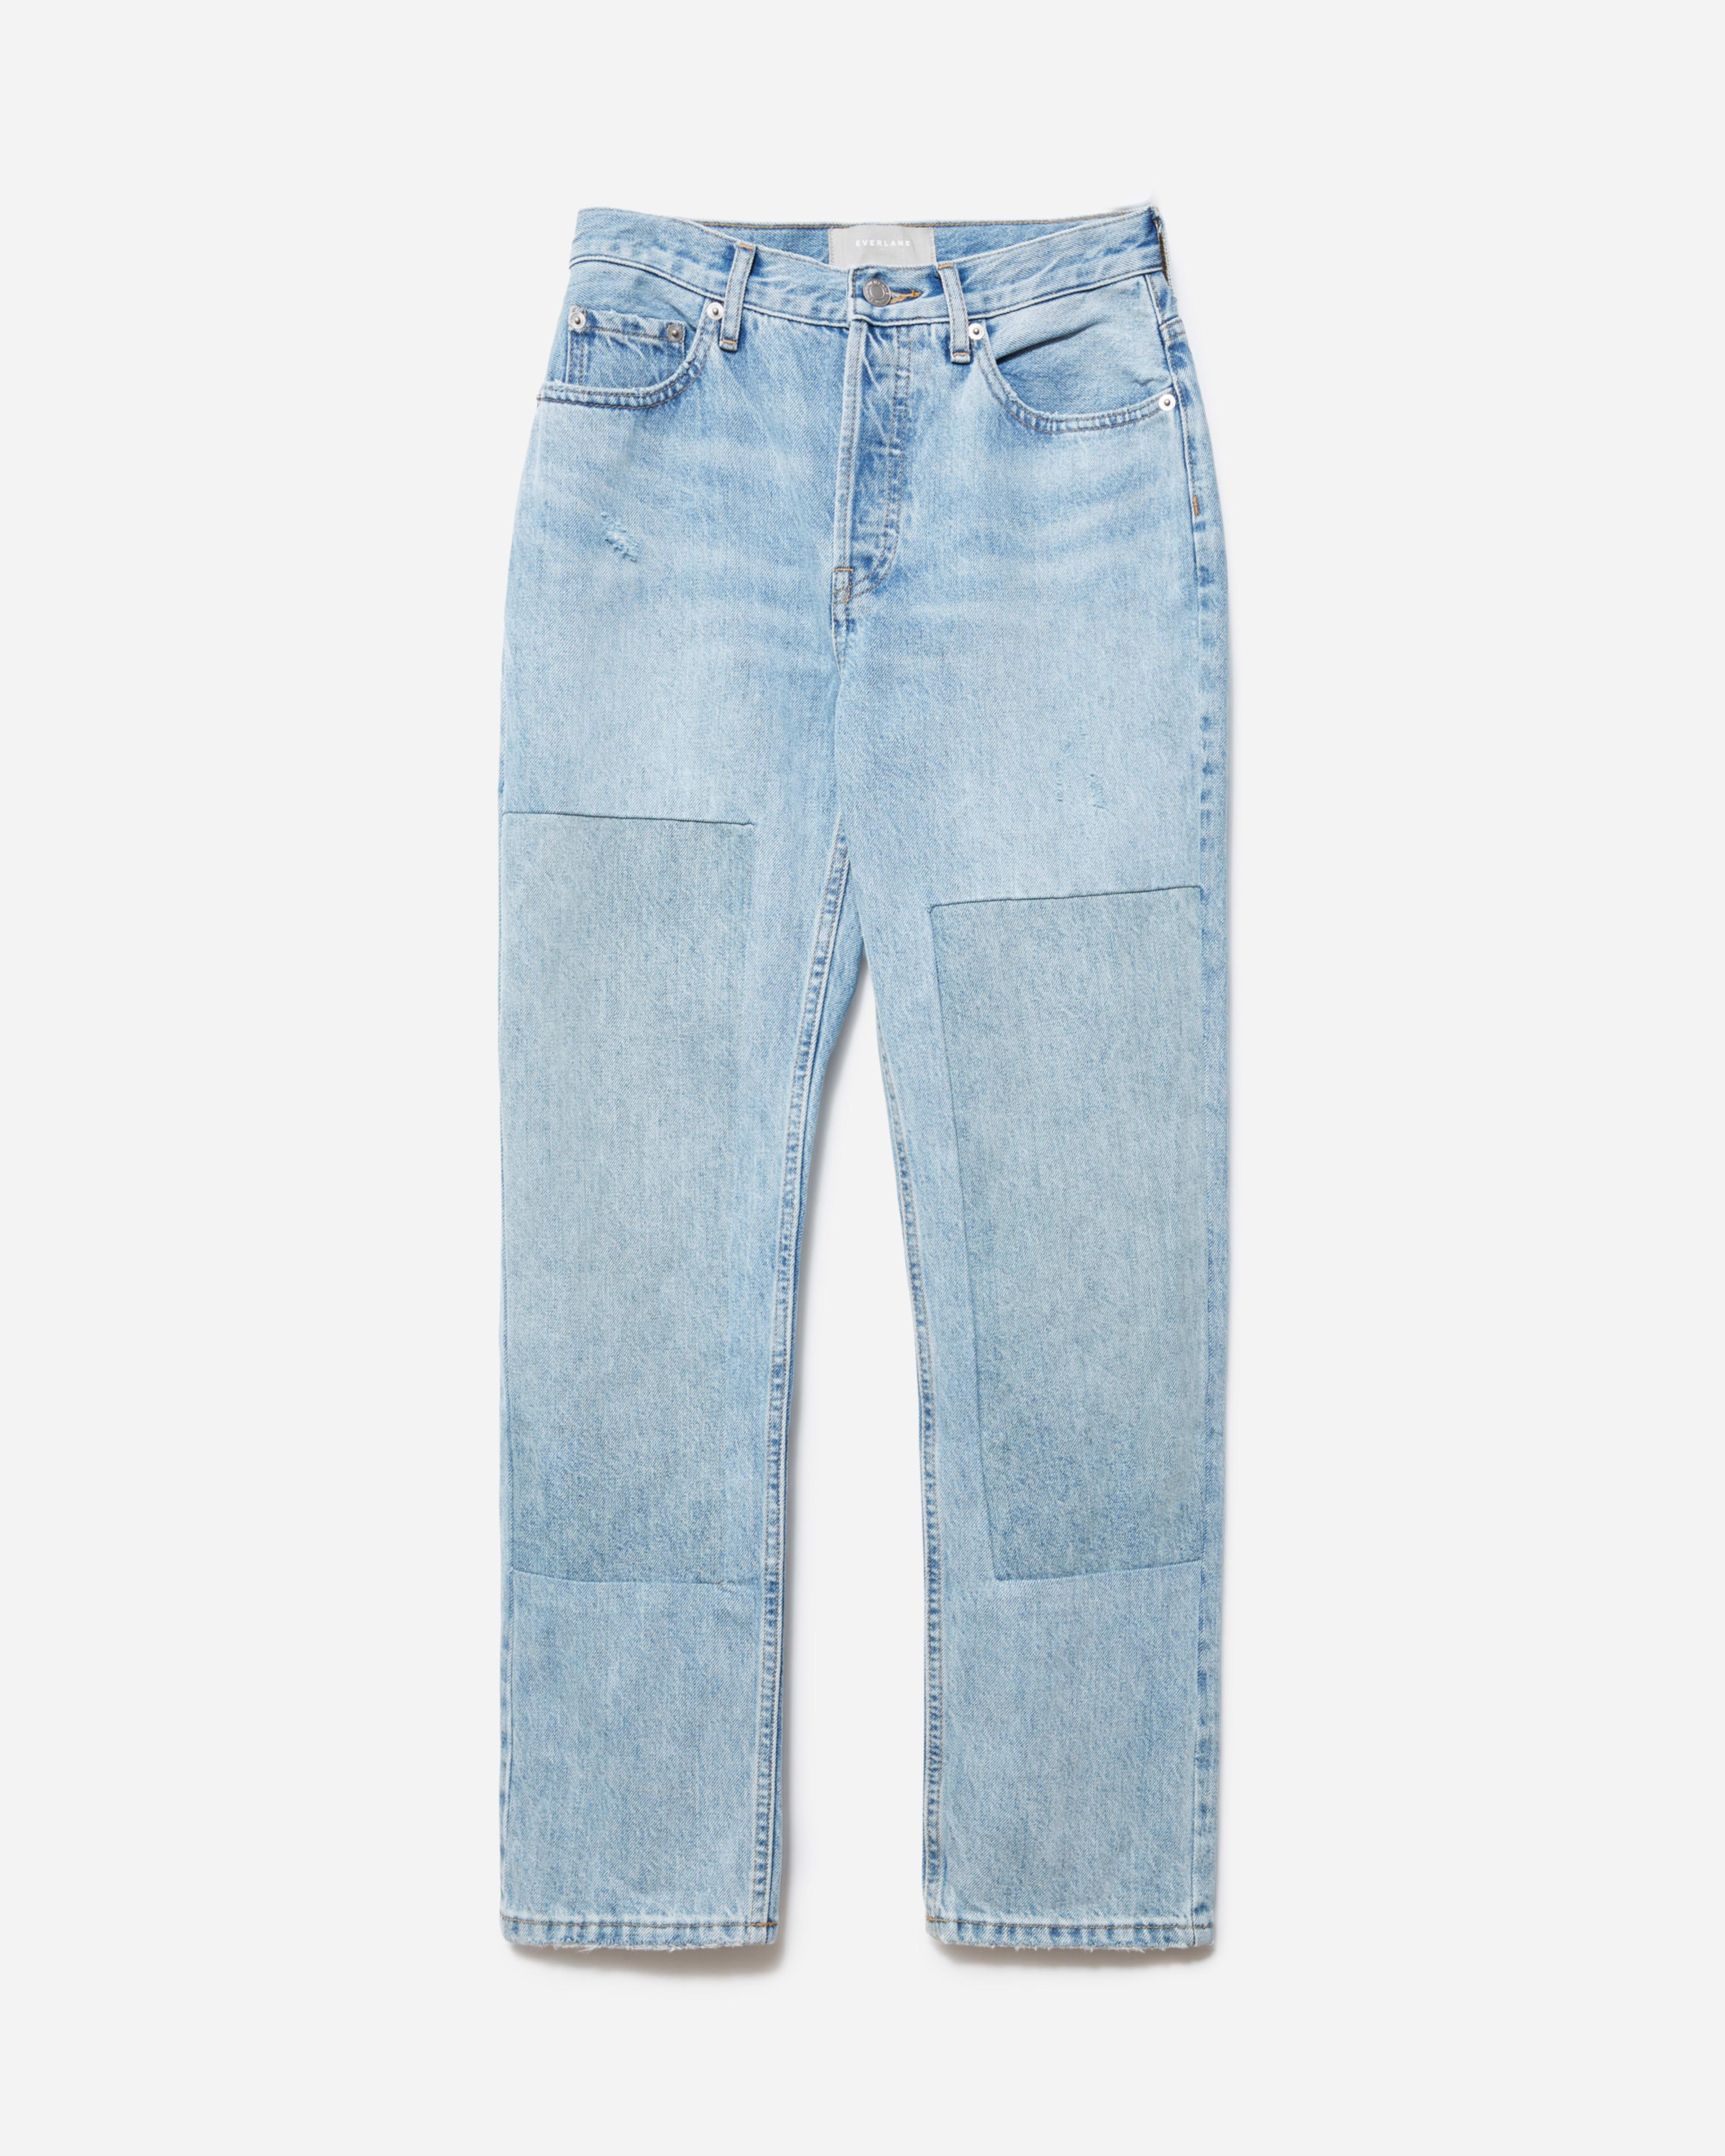 The ’90s Cheeky® Jean Patched Blue – Everlane